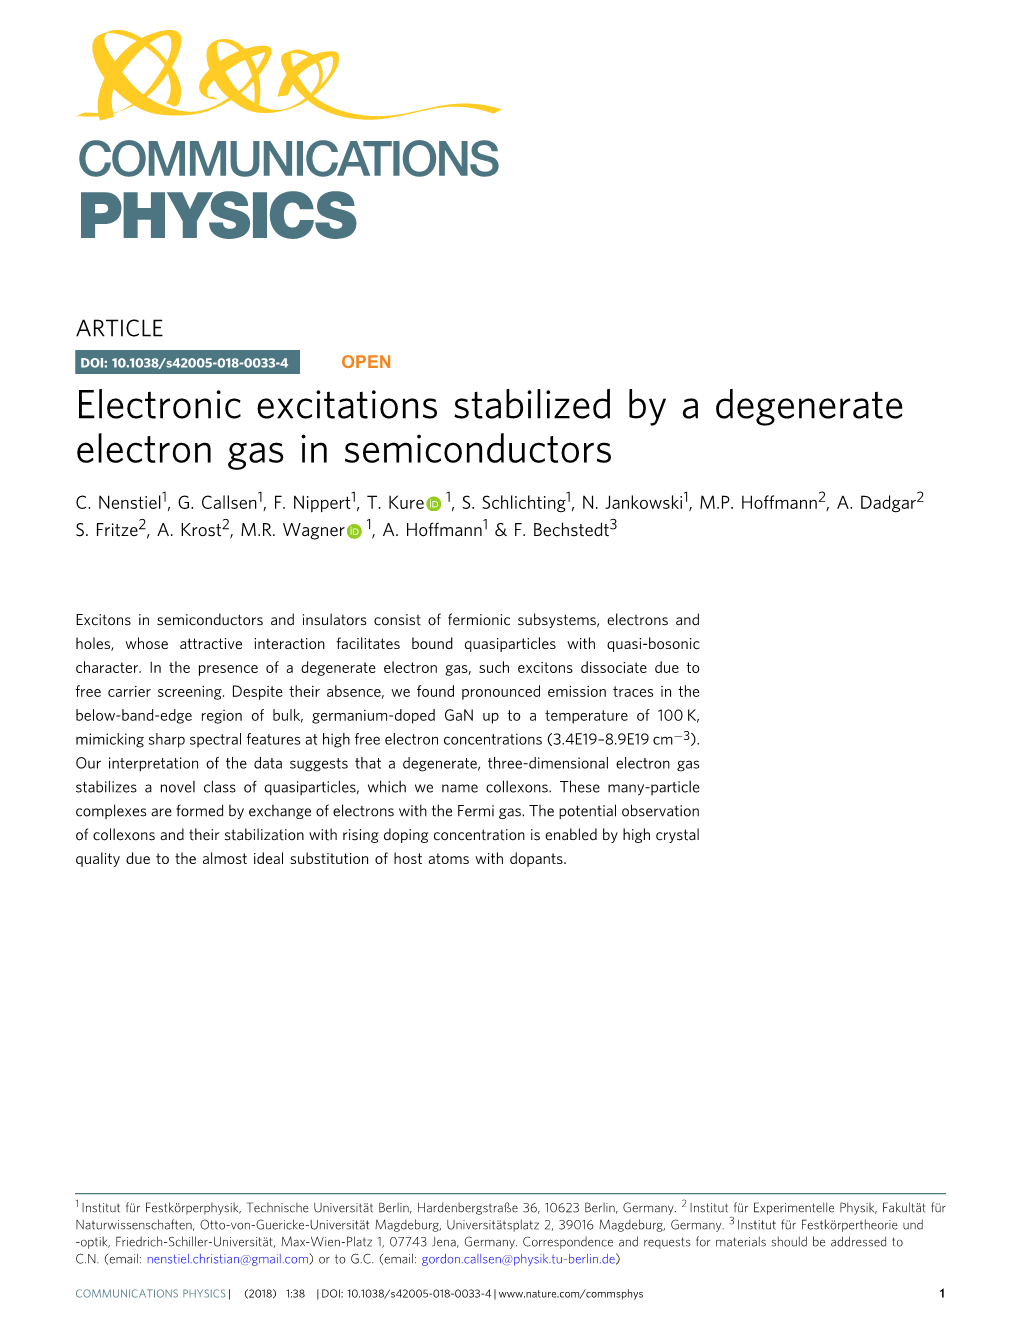 Electronic Excitations Stabilized by a Degenerate Electron Gas in Semiconductors